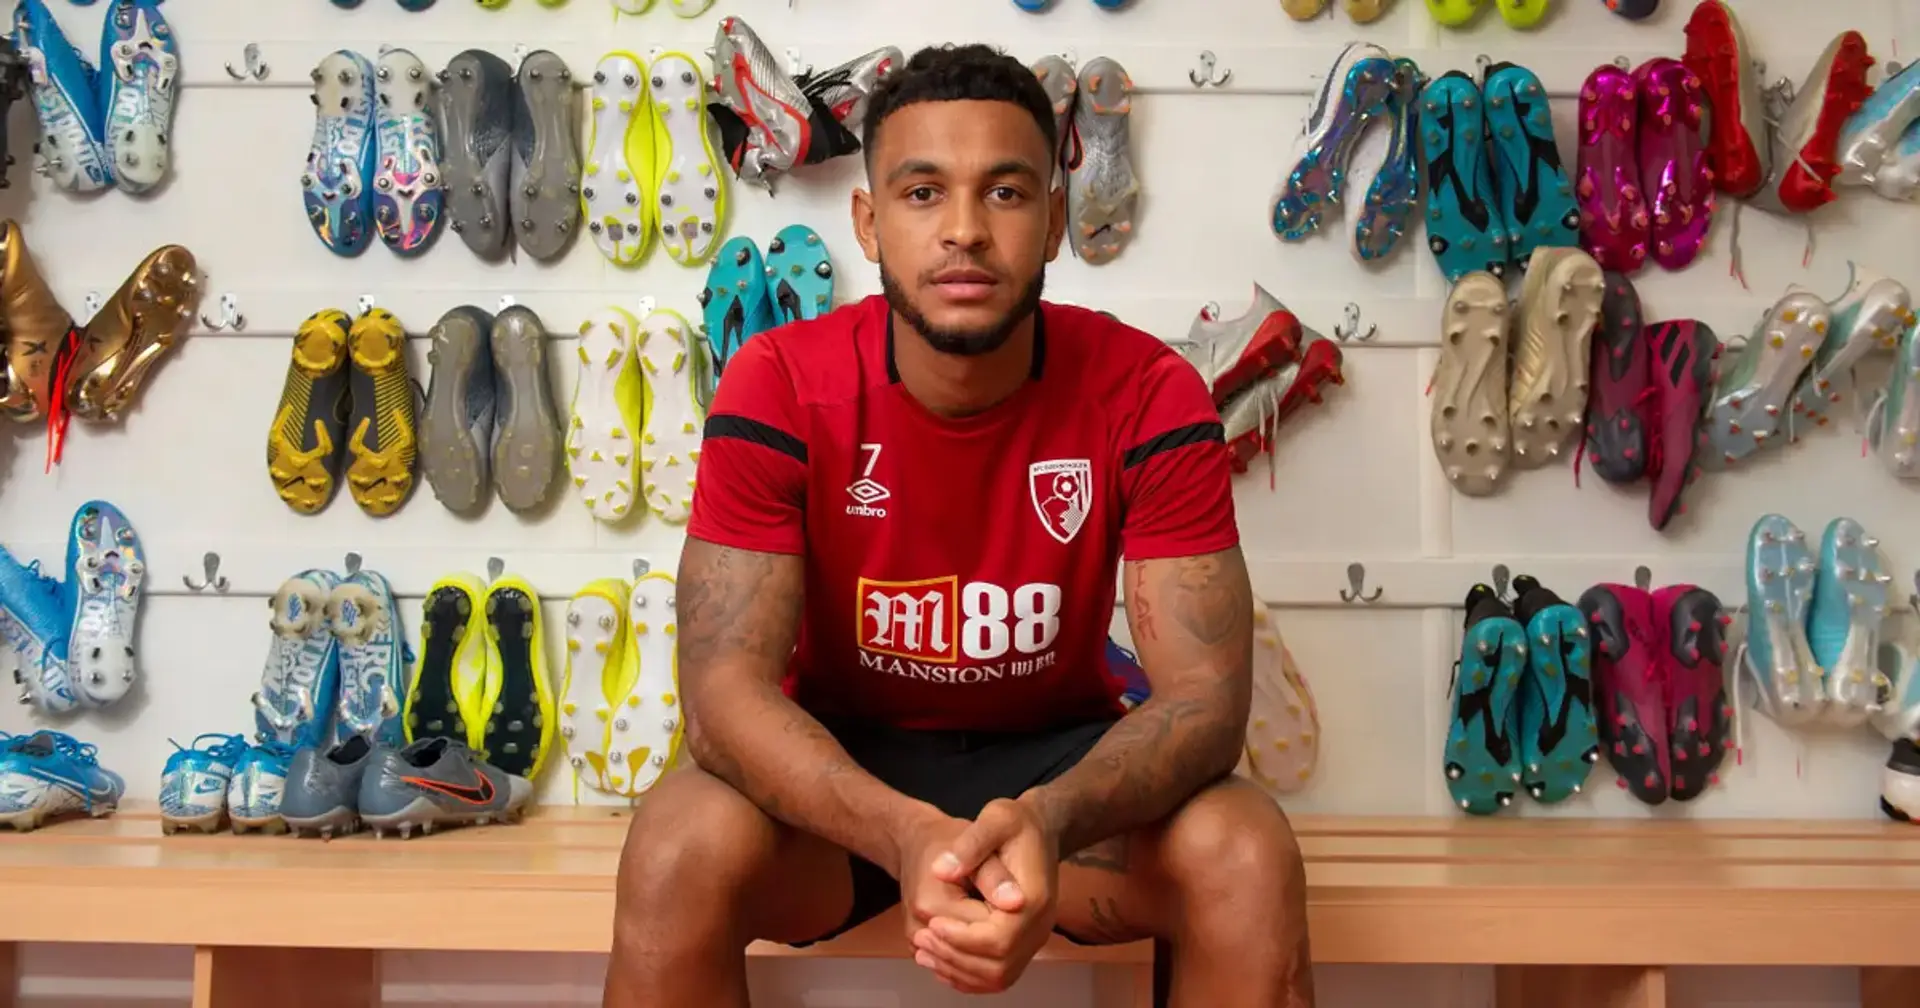 'That would be amazing': Josh King still hopeful of United move despite failed Old Trafford comeback in January